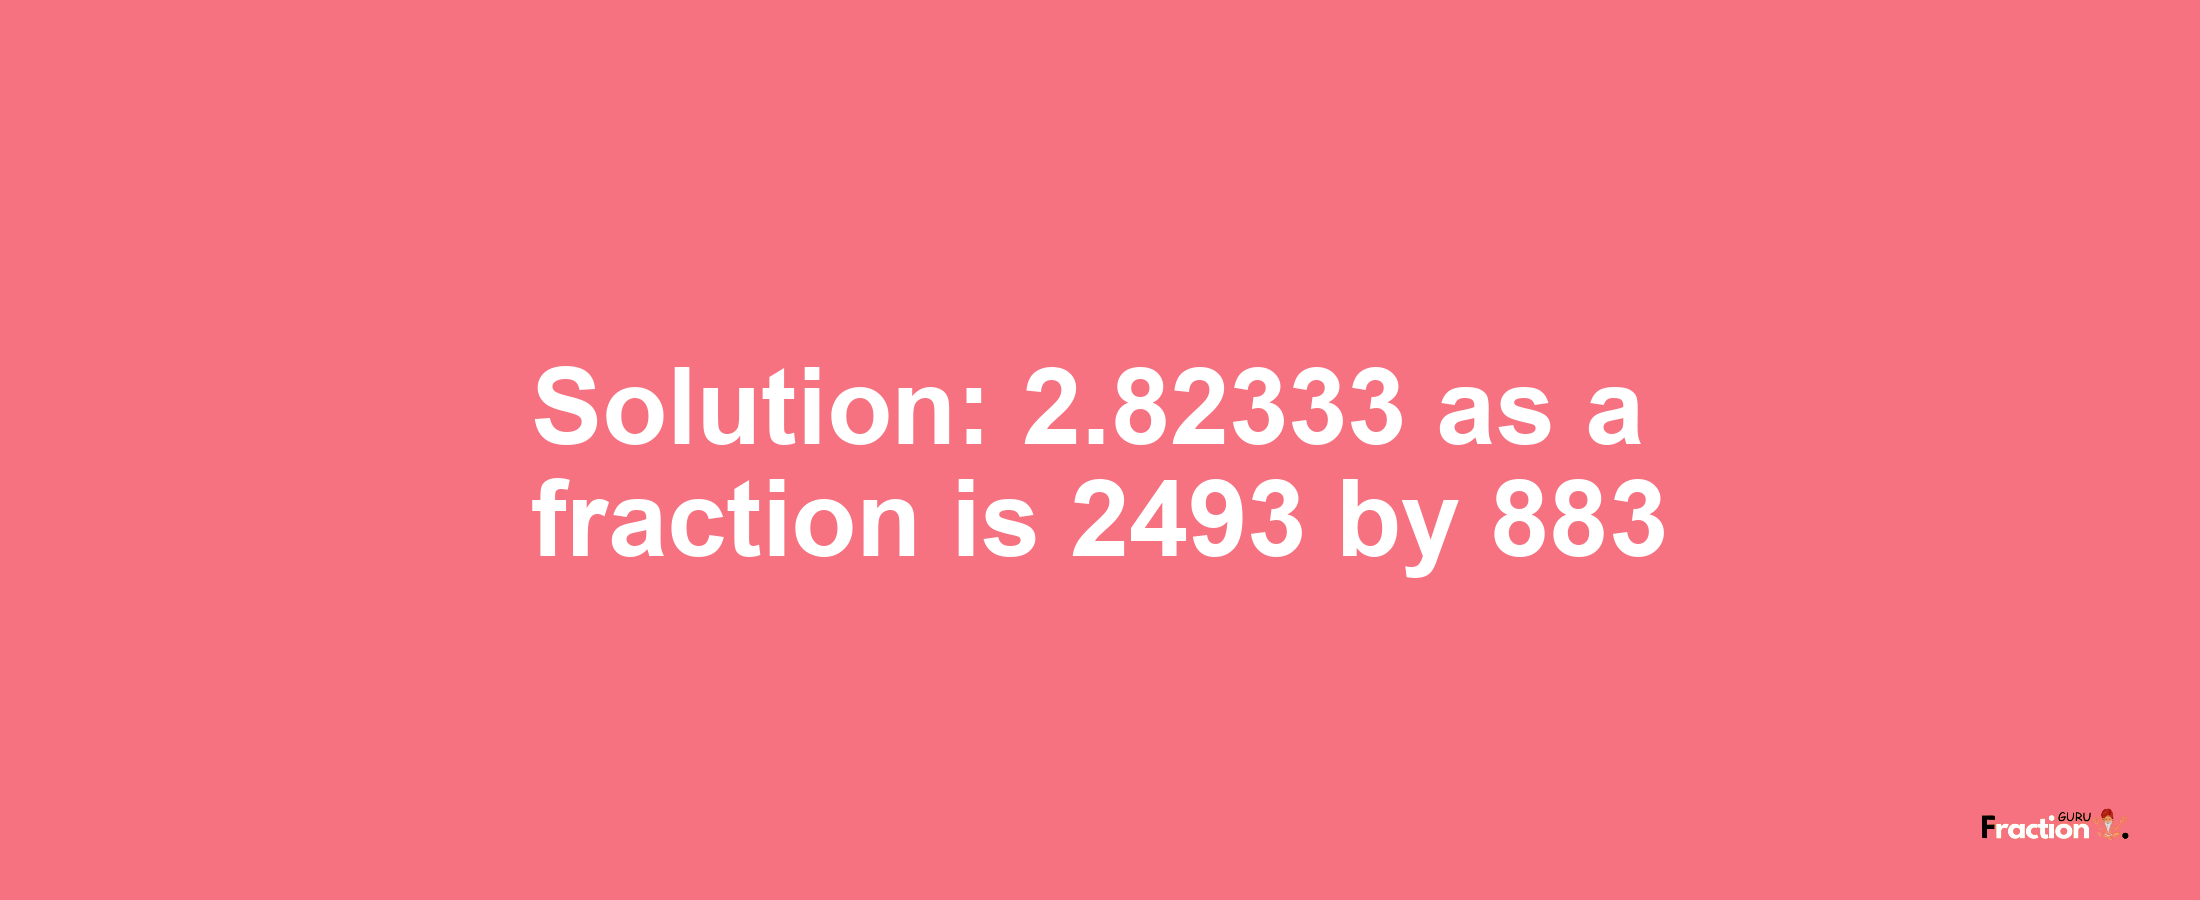 Solution:2.82333 as a fraction is 2493/883